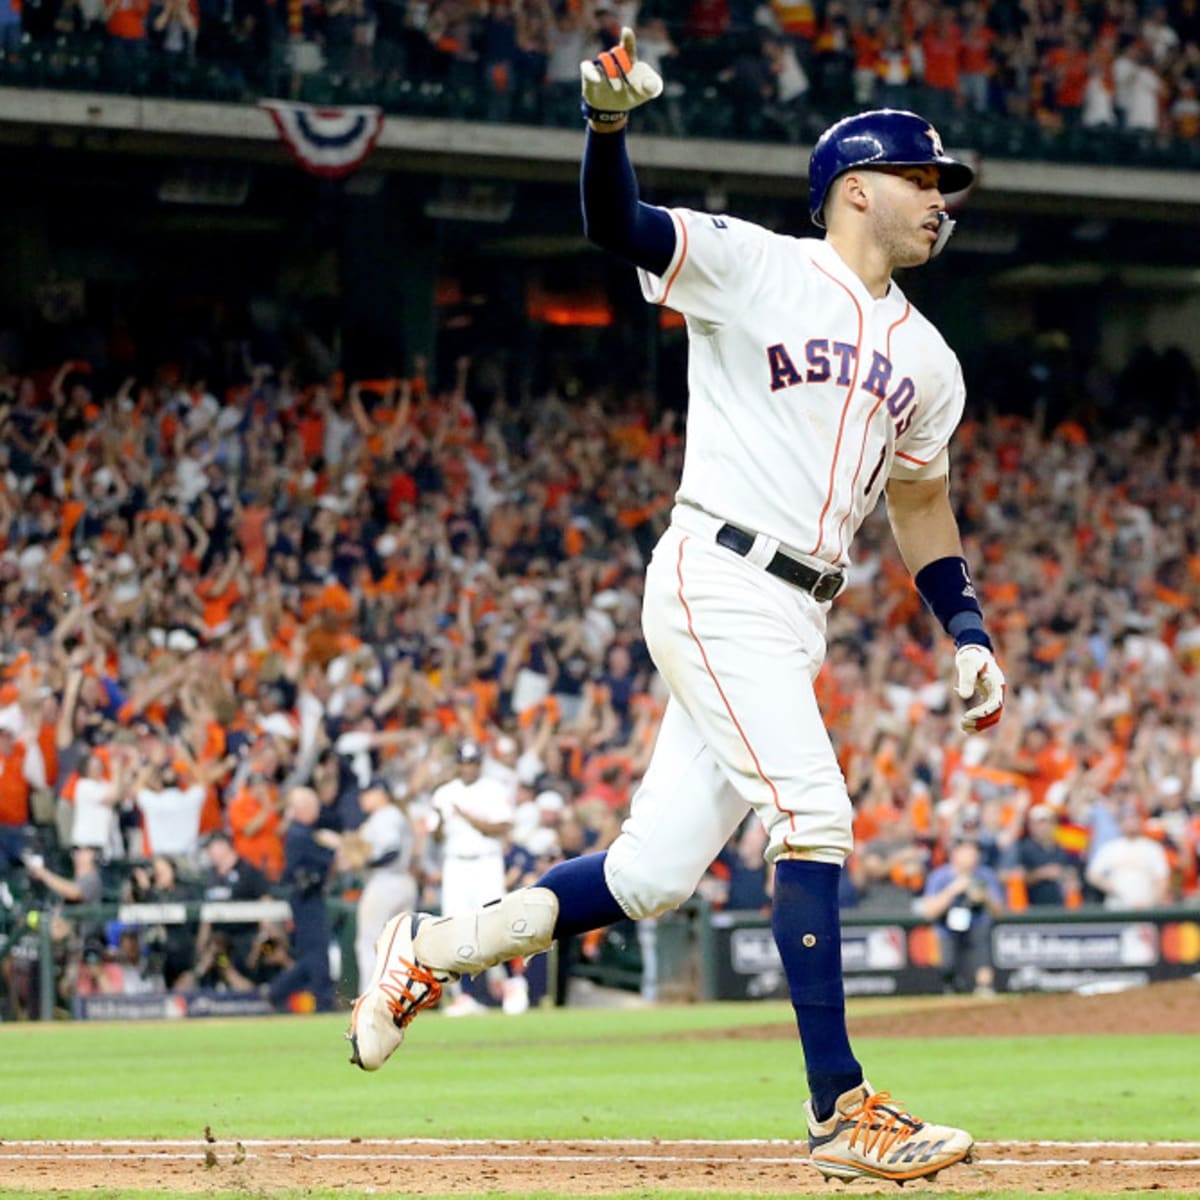 Correa's walk-off home run gives Astros win over Yankees in Game 2 of ALCS